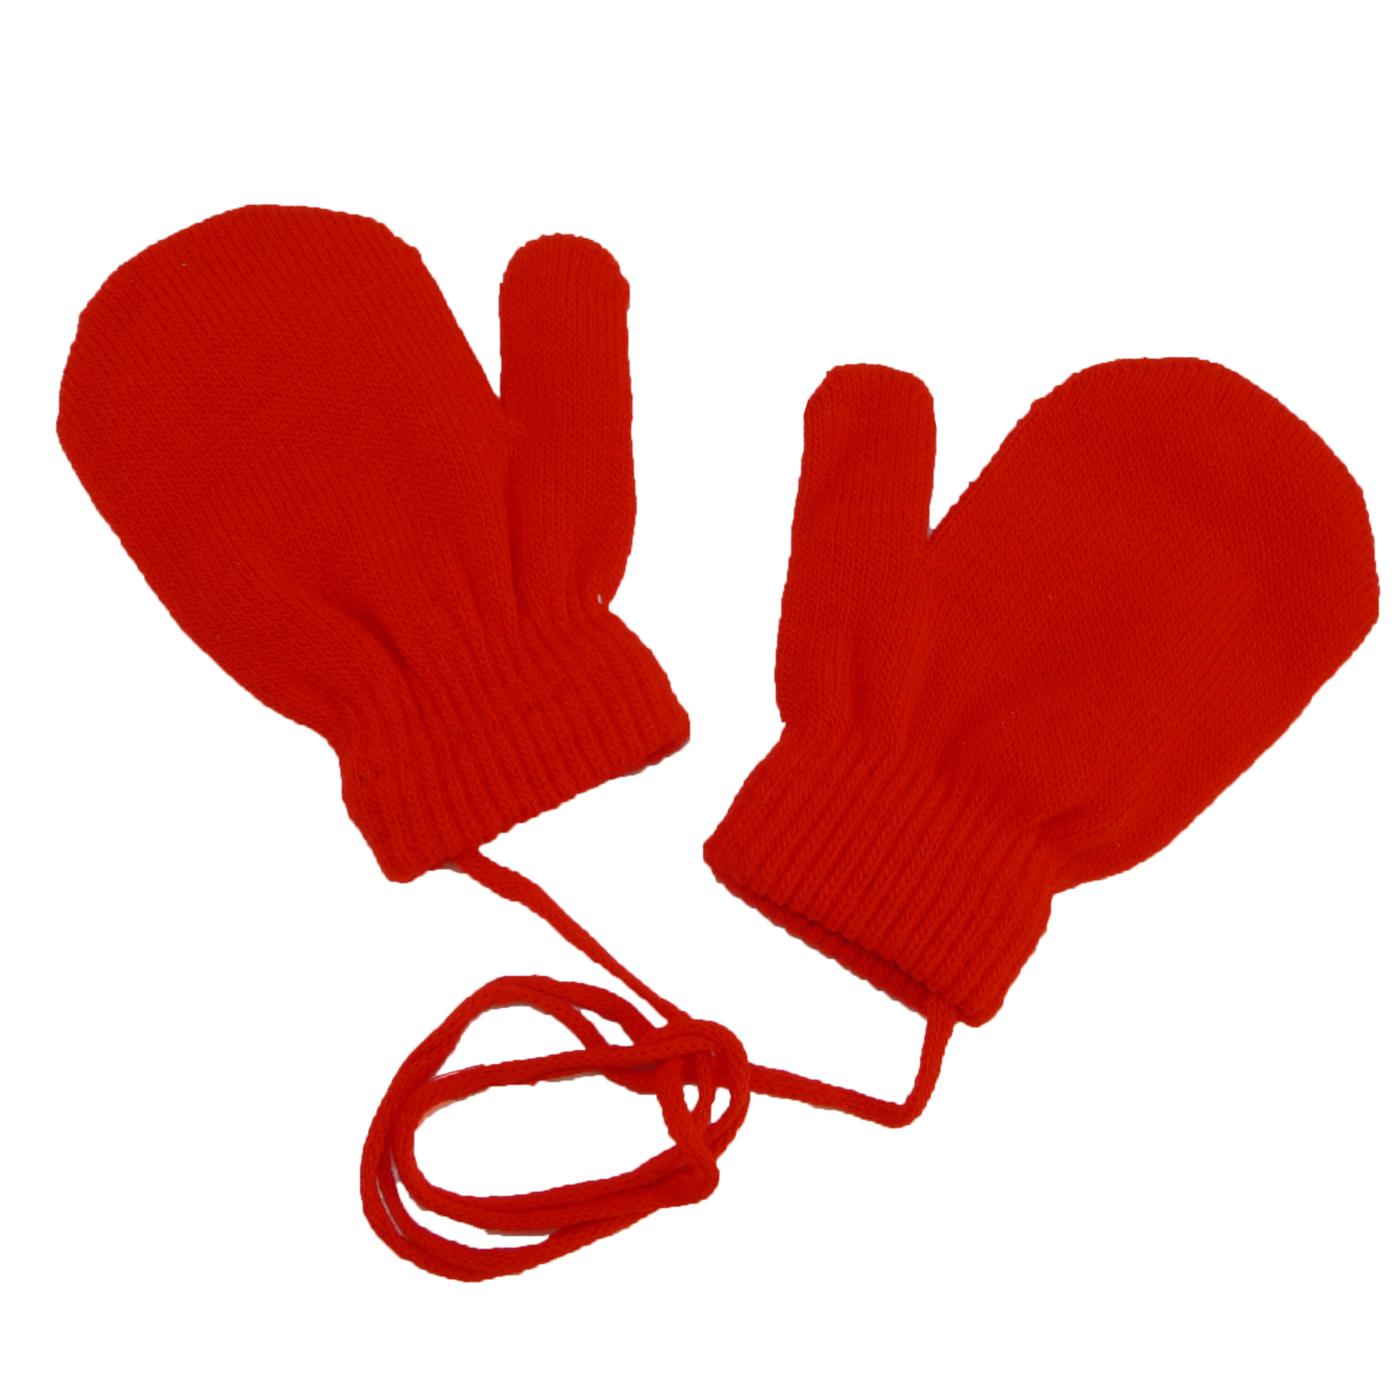 clipart of mittens and hat - photo #49